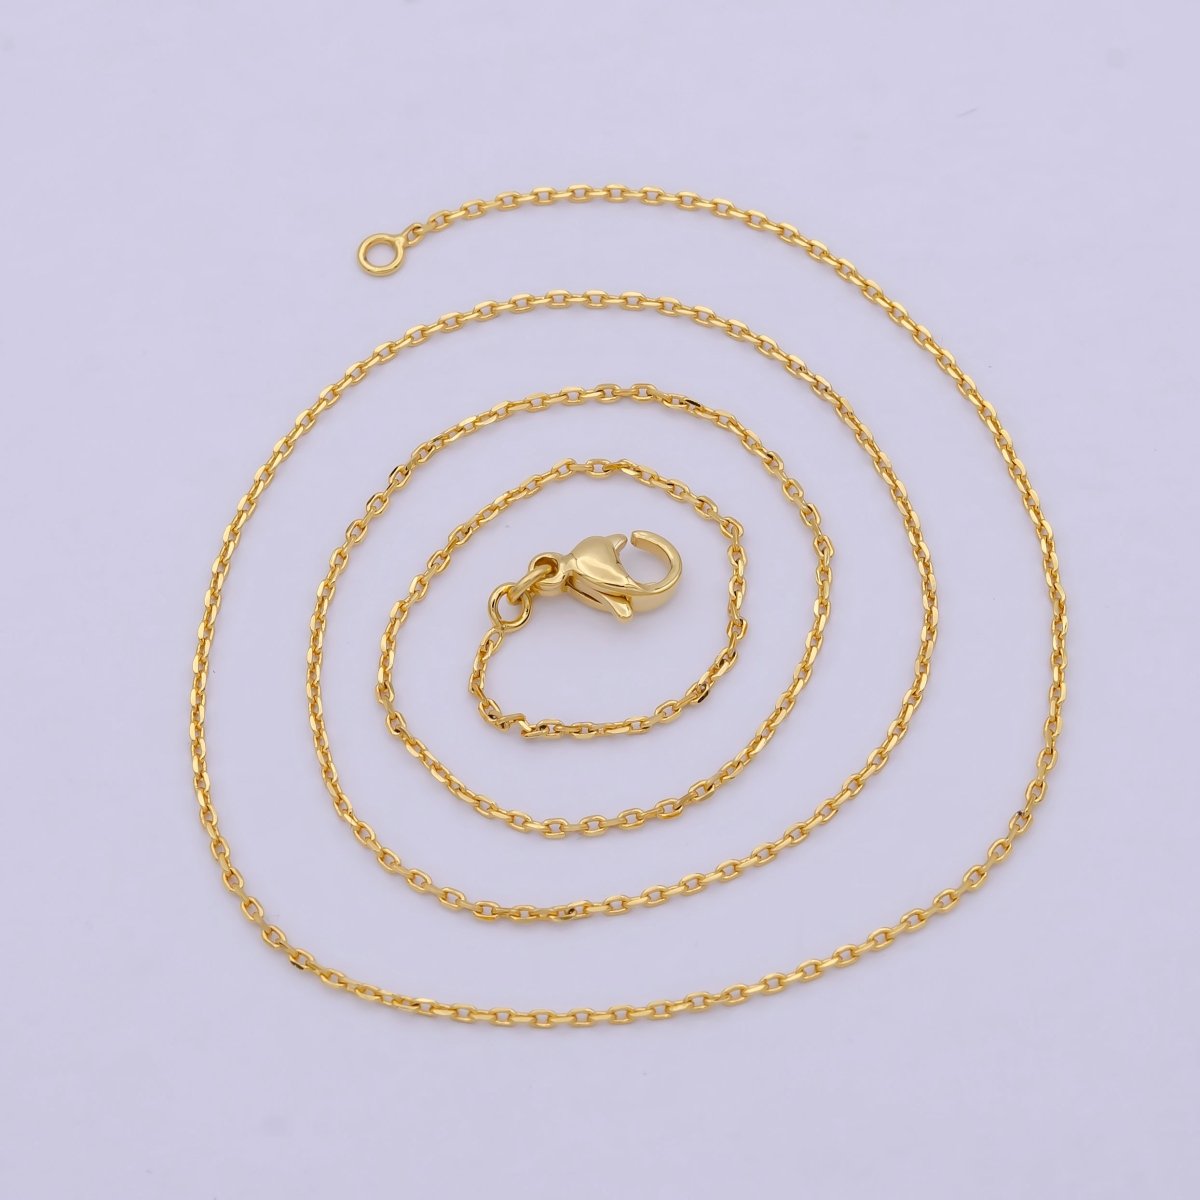 Dainty 24K Gold Filled Cable Chain Necklace 17.5 inch for Woman Jewelry | WA-806 Clearance Pricing - DLUXCA